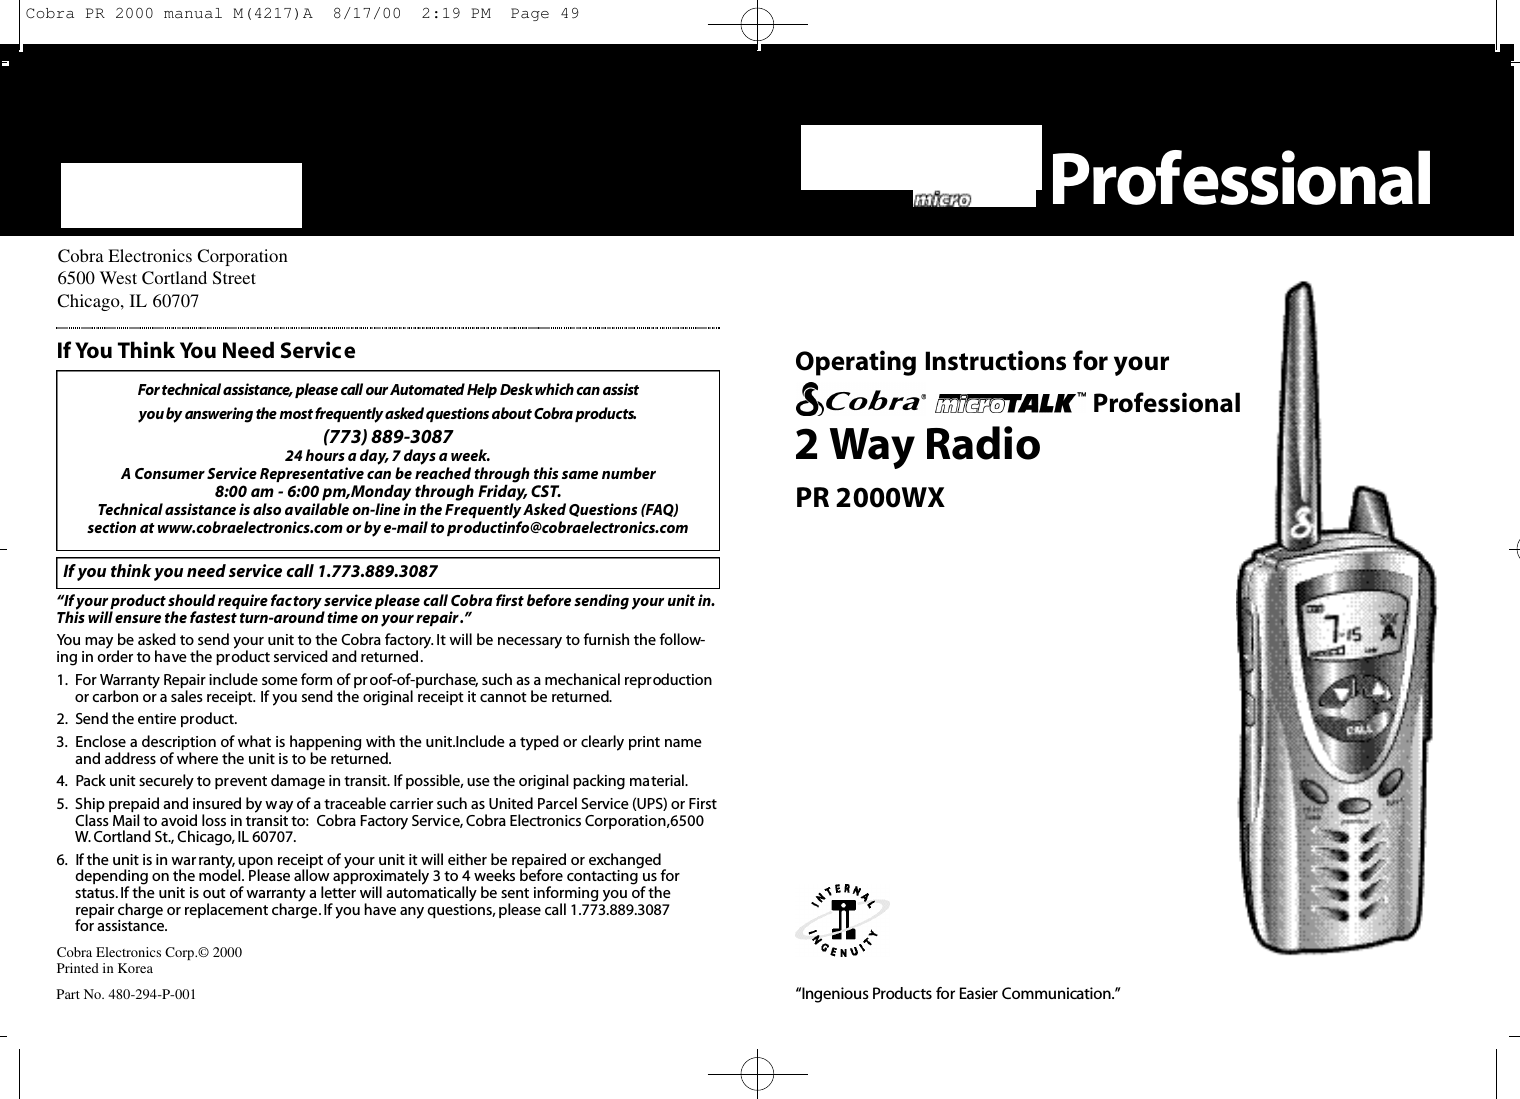 “Ingenious Prod u cts for Easier Co m m u n i cat i o n .”Cobra Electronics Corporation6500 West Cortland StreetChicago, IL 60707Cobra Electronics Corp.© 2000Printed in KoreaPart No. 480-294-P-001For te c h n i cal assistance, please call our Au to m a ted Help Desk which can assist you by answering the most fre q u e n t ly asked questions about Co b ra prod u ct s.(773) 889-3087 24 hours a day, 7 days a week.A Consumer Service Representative can be reached through this same number 8:00 am - 6:00 pm,Monday through Friday, CST.Technical assistance is also available on-line in the Frequently Asked Questions (FAQ) section at www.cobraelectronics.com or by e-mail to productinfo@cobraelectronics.comIf you think you need service call 1.773.889.3087“If your product should require factory service please call Cobra first before sending your unit in.This will ensure the fastest turn-around time on your repair .”You may be asked to send your unit to the Cobra factory. It will be necessary to furnish the follow-ing in order to have the product serviced and returned.1. For Warranty Repair include some form of proof-of-purchase, such as a mechanical reproductionor carbon or a sales receipt. If you send the original receipt it cannot be returned.2. Send the entire product.3. Enclose a description of what is happening with the unit.Include a typed or clearly print nameand address of where the unit is to be returned.4. Pack unit securely to prevent damage in transit. If possible, use the original packing material.5. Ship prepaid and insured by way of a traceable carrier such as United Parcel Service (UPS) or FirstClass Mail to avoid loss in transit to: Cobra Factory Service, Cobra Electronics Corporation,6500W. Cortland St., Chicago, IL 60707.6. If the unit is in warranty, upon receipt of your unit it will either be repaired or exchangeddepending on the model. Please allow approximately 3 to 4 weeks before contacting us for status. If the unit is out of warranty a letter will automatically be sent informing you of the repair charge or replacement charge.If you have any questions, please call 1.773.889.3087 for assistance.If You Think You Need Service2 Way RadioPR 2000WXO pe rating Instru ctions for your ProfessionalPro fe s s i o n a lCobra PR 2000 manual M(4217)A  8/17/00  2:19 PM  Page 49